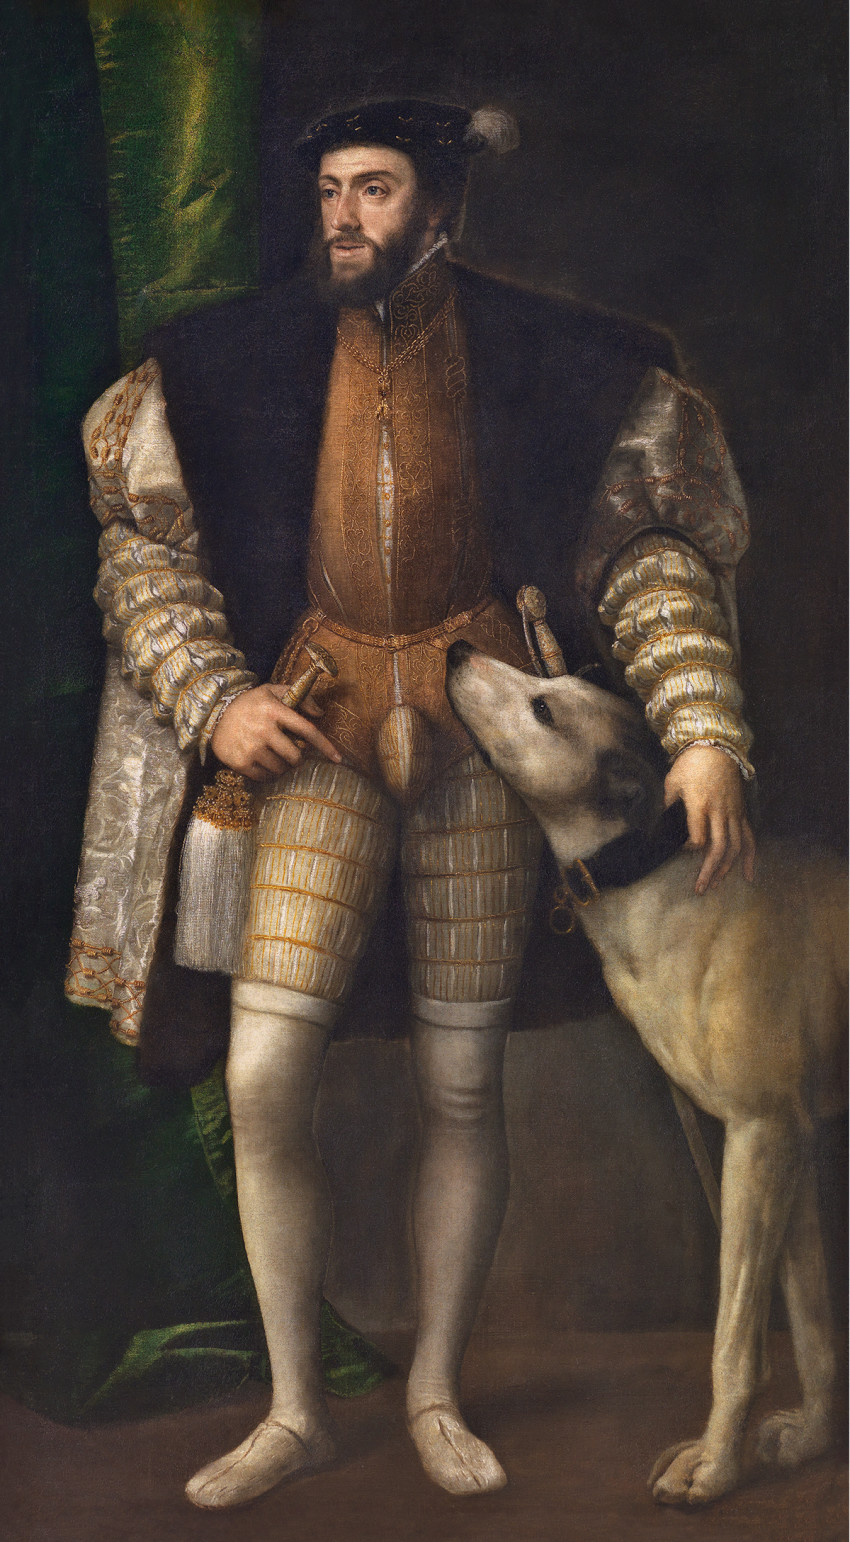 Titian, Charles V with a Dog